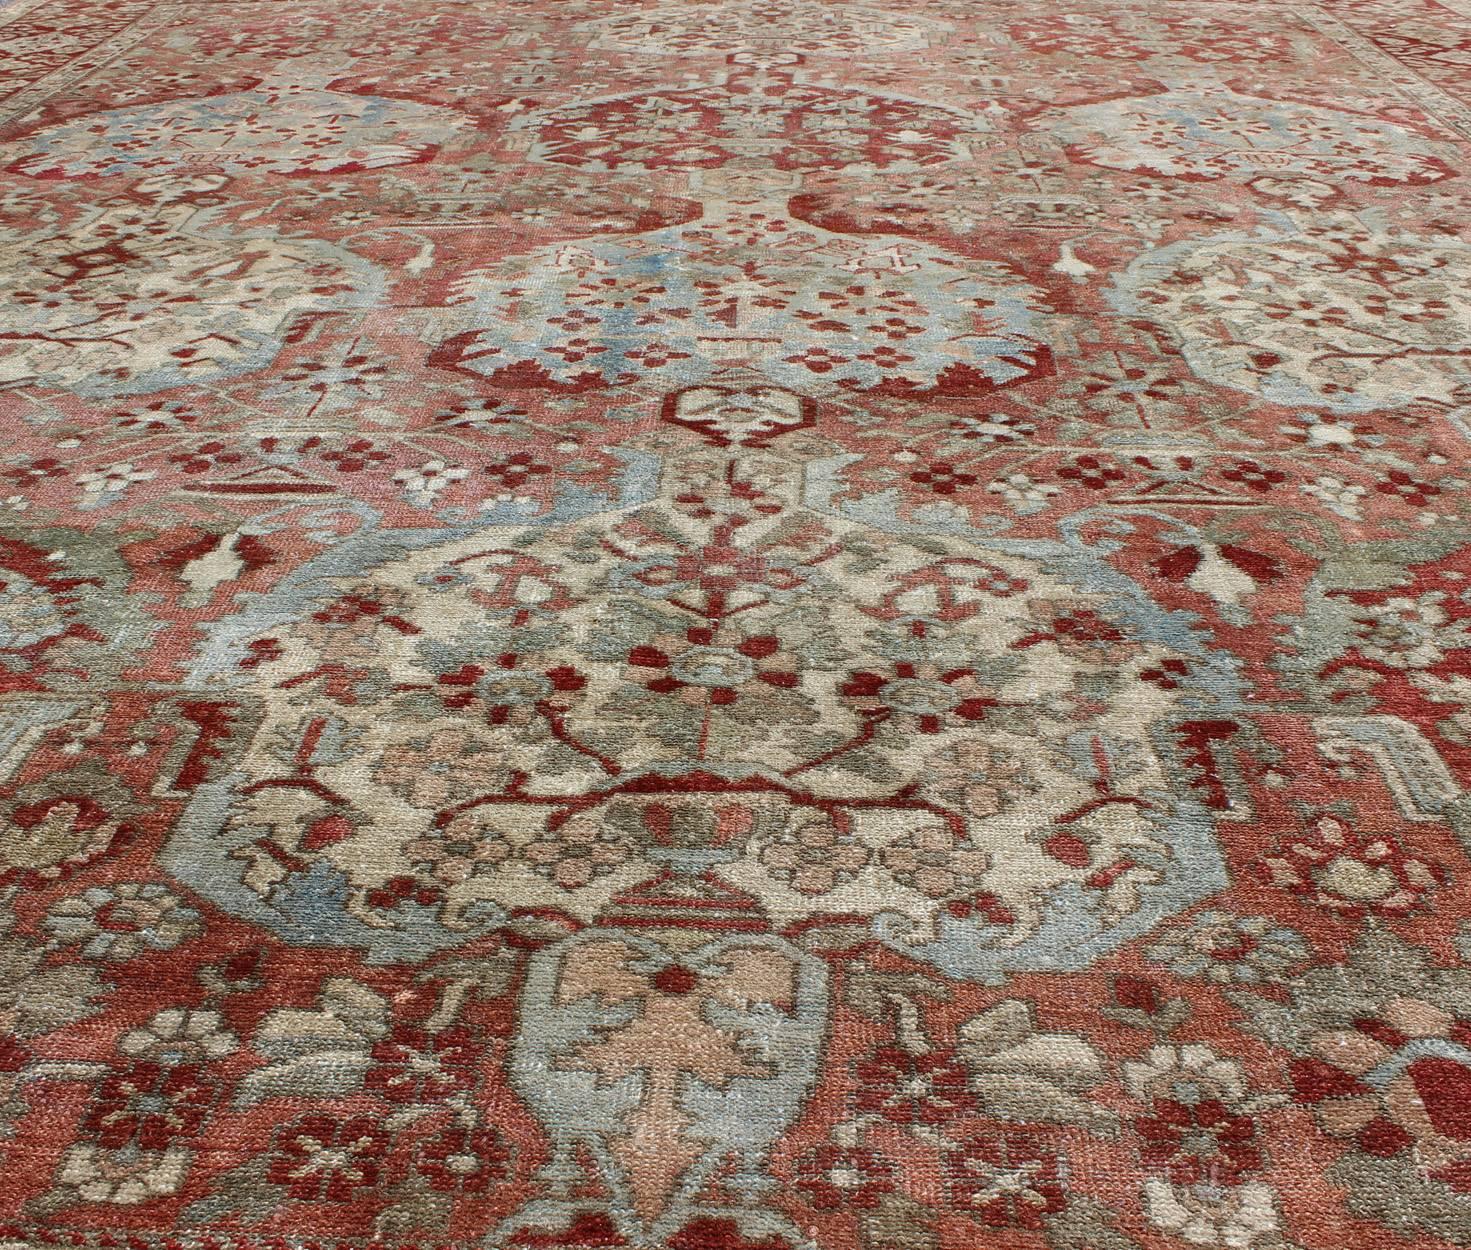 Early 20th Century Antique Persian Large Bakhtiari Rug with Tiered Sub-Geometric Medallions